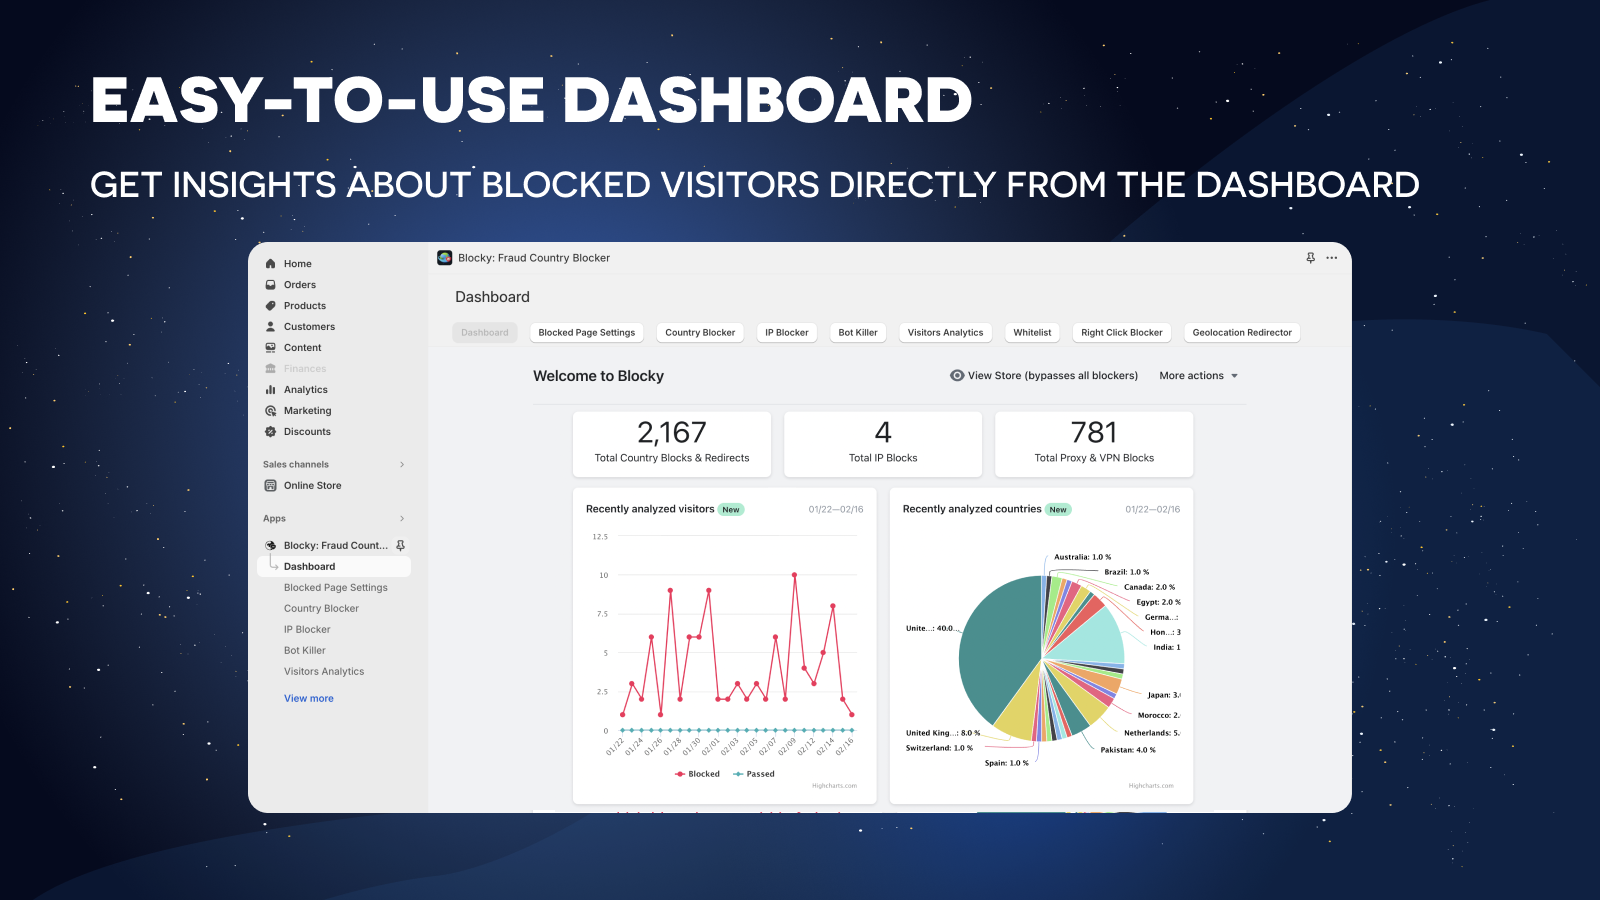 The dashboard of the app with traffic statistics & insights